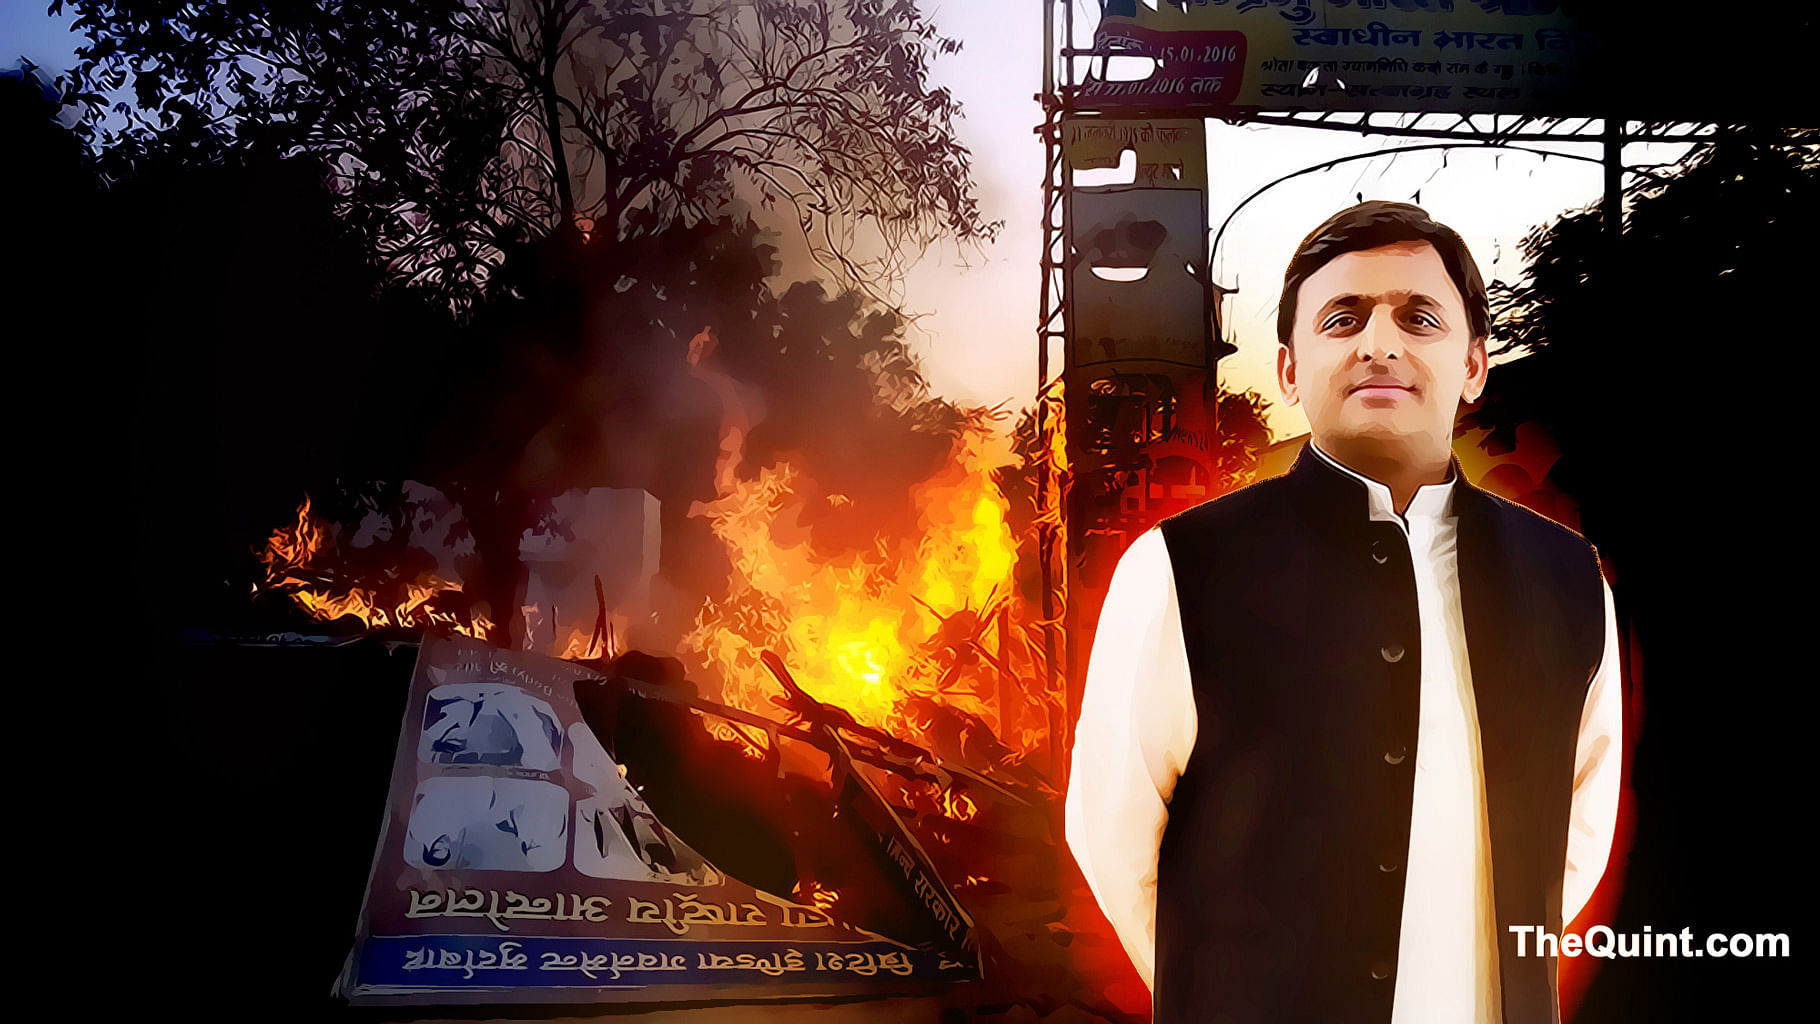 Uttar Pradesh Chief Minister Akhilesh Yadav said that the strictest action would be taken against the culprits and the guilty would be brought to justice. (Photo: <b>The Quint)</b>